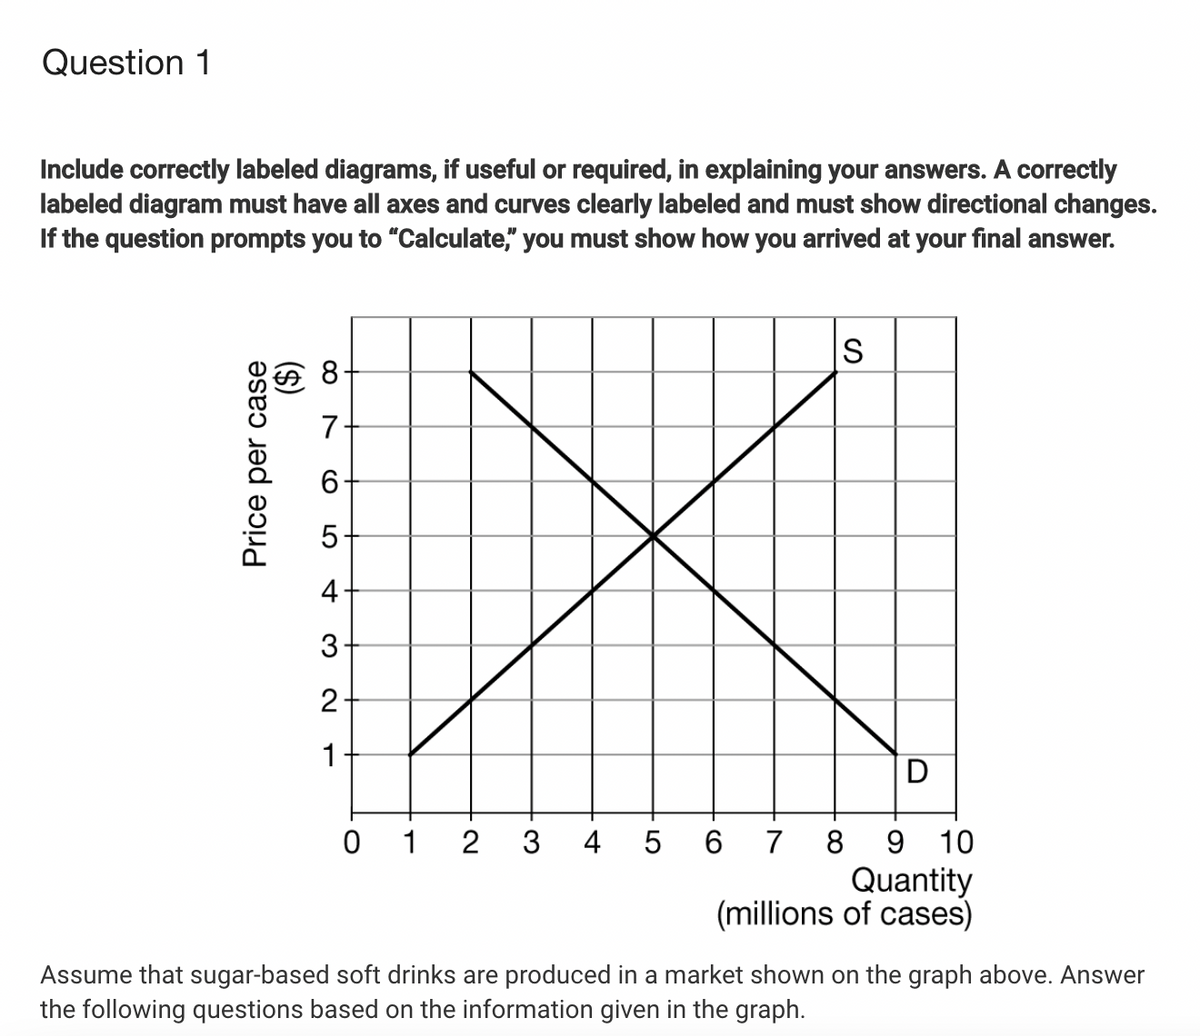 Question 1
Include correctly labeled diagrams, if useful or required, in explaining your answers. A correctly
labeled diagram must have all axes and curves clearly labeled and must show directional changes.
If the question prompts you to "Calculate," you must show how you arrived at your final answer.
IS
8.
7
6.
5
2
1
D
0 1
3
4 5 6
7
8
10
Quantity
(millions of cases)
Assume that sugar-based soft drinks are produced in a market shown on the graph above. Answer
the following questions based on the information given in the graph.
Price per case
($)
4-
CO
